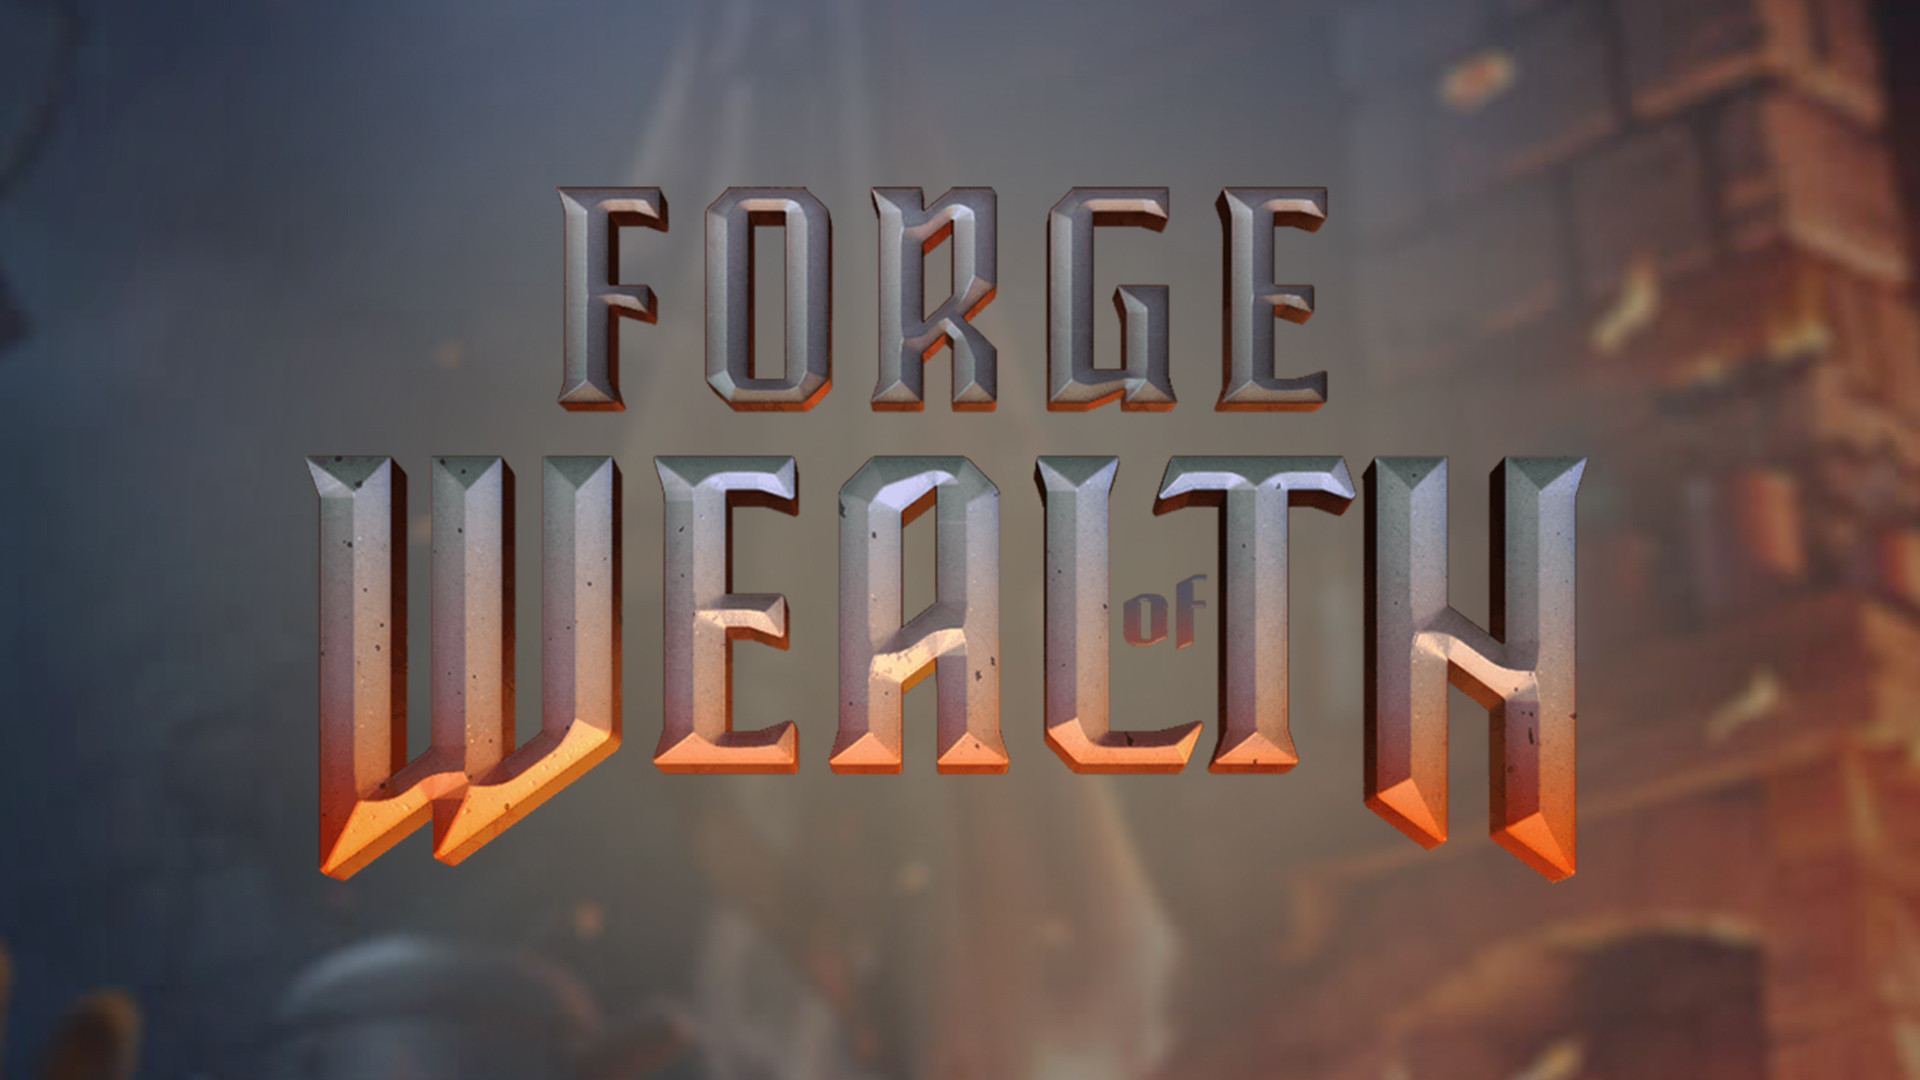 Forge of Wealth